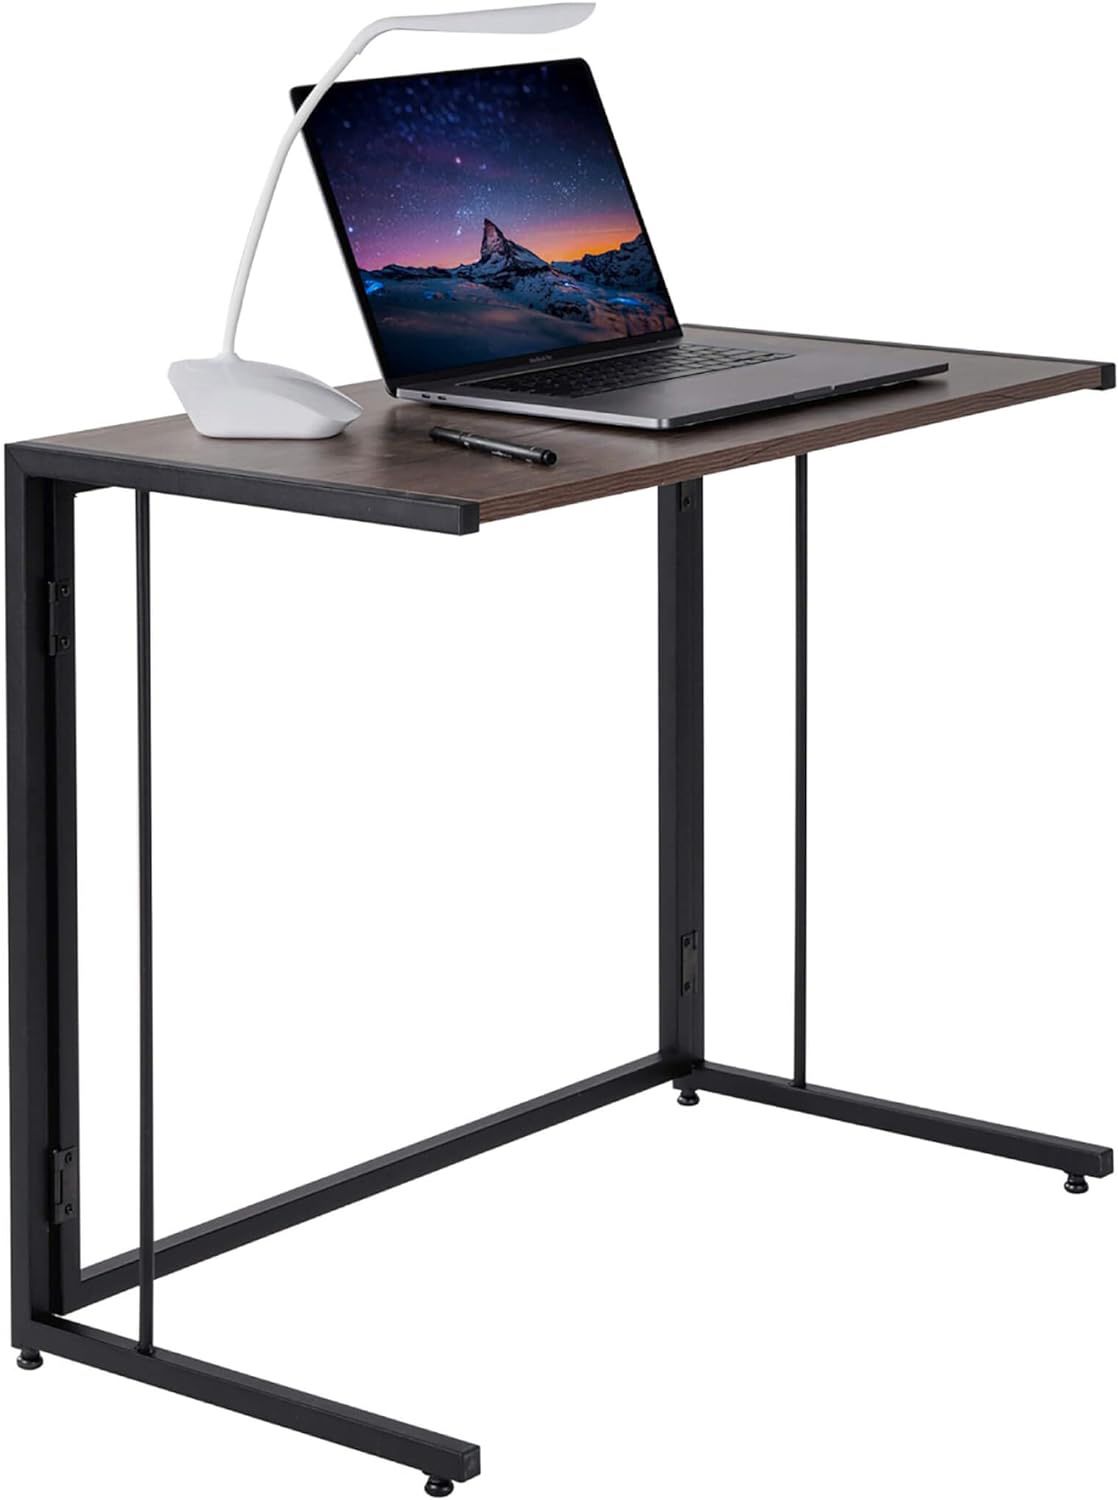 NEW - XRESLUCO Desk, Computer Desk 31.5",C Table,Sofa Side Table,Small Desk for Small Spaces,No-Assembly Space-Saving Folding Desk/Home Office,Black -